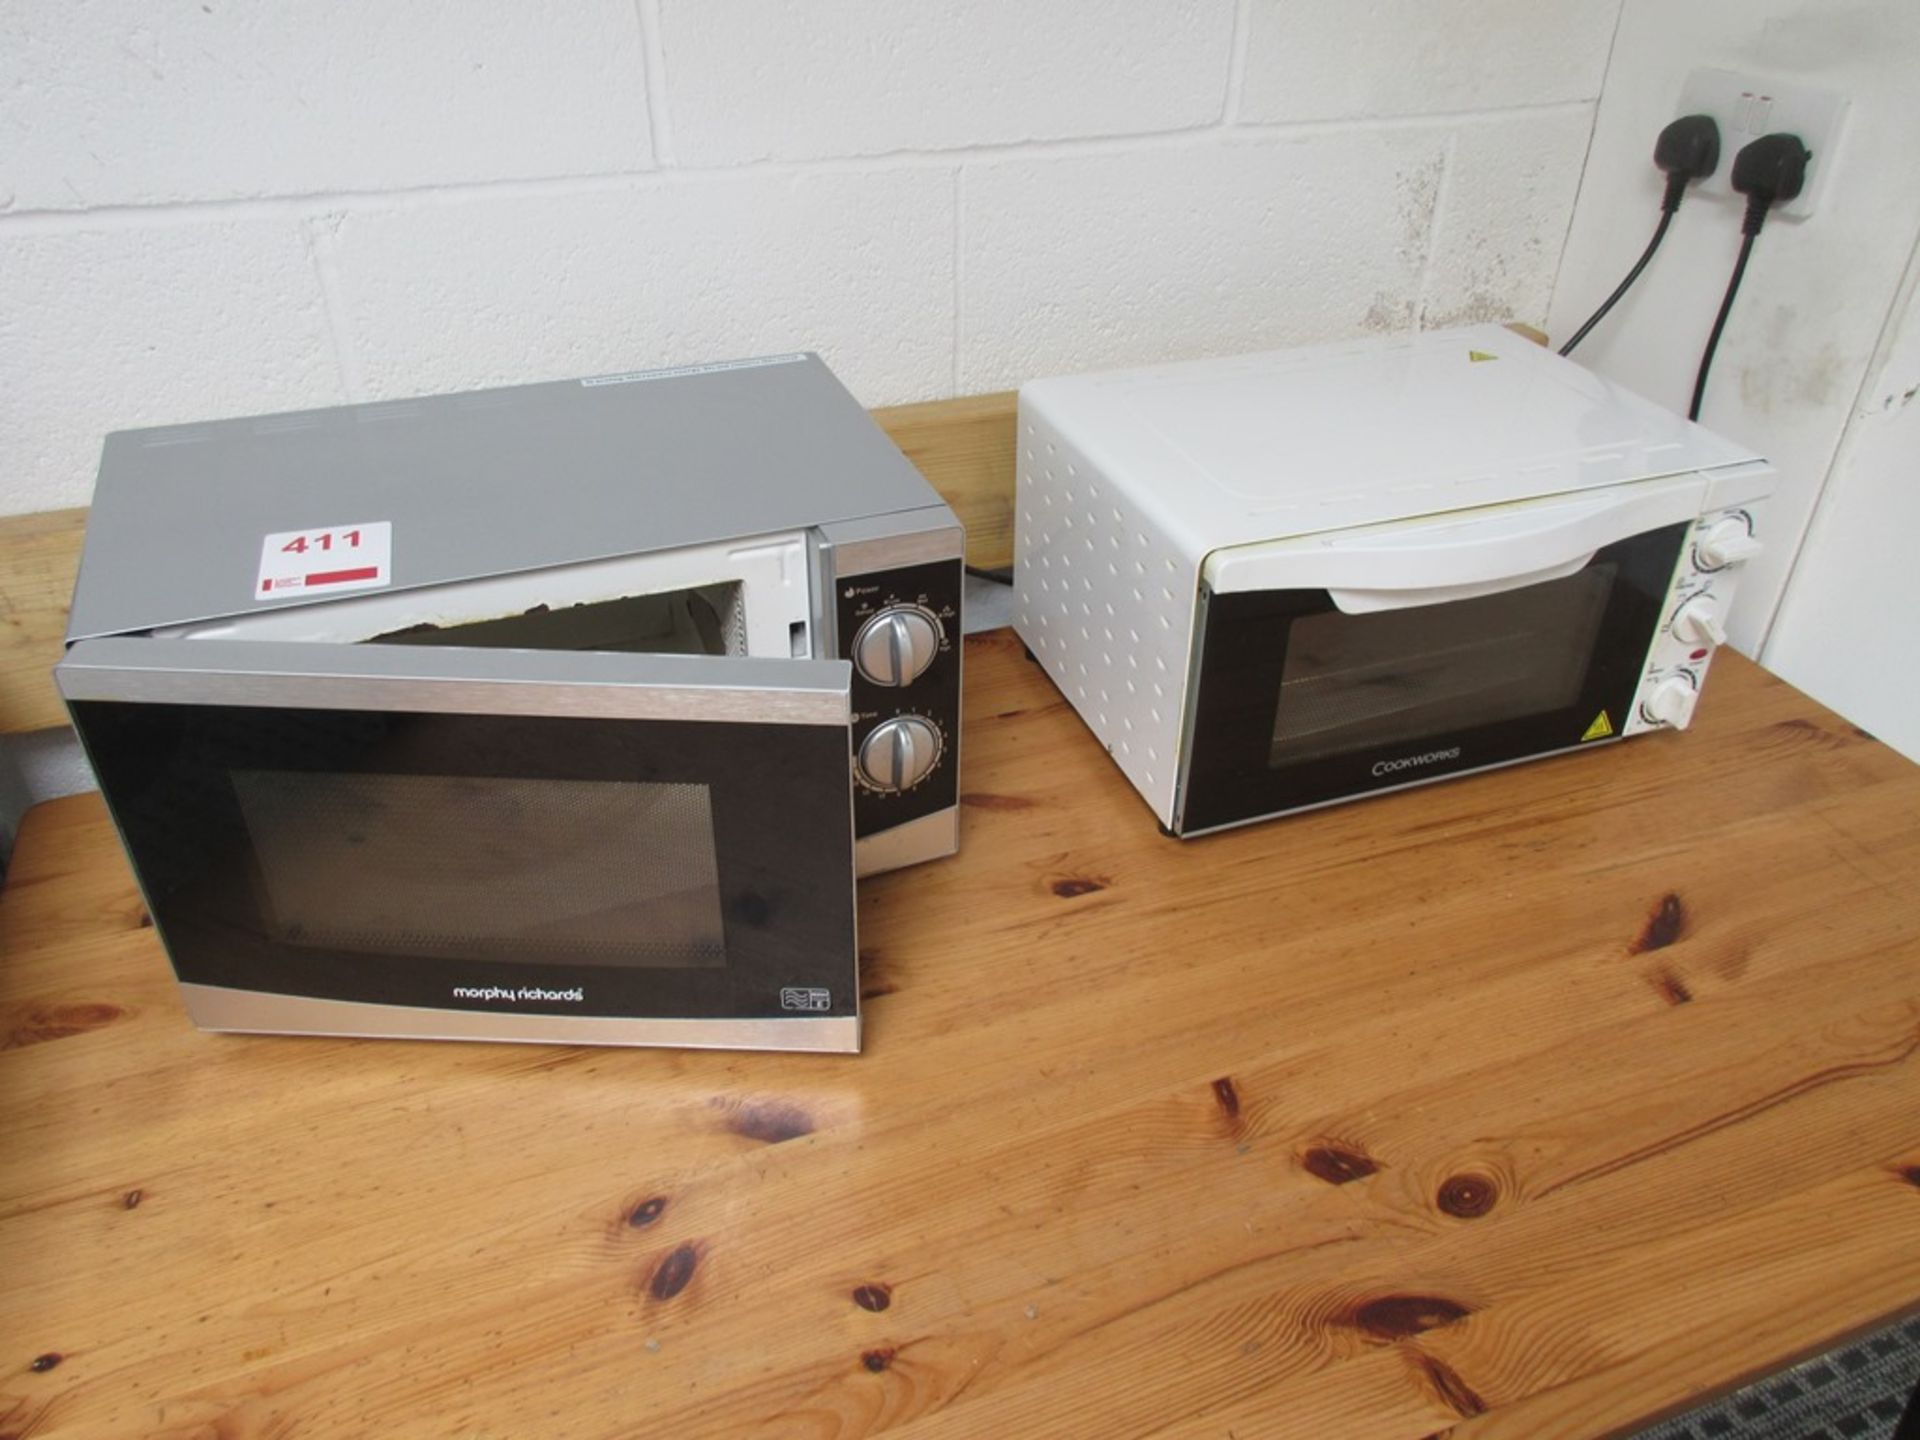 Two assorted microwaves